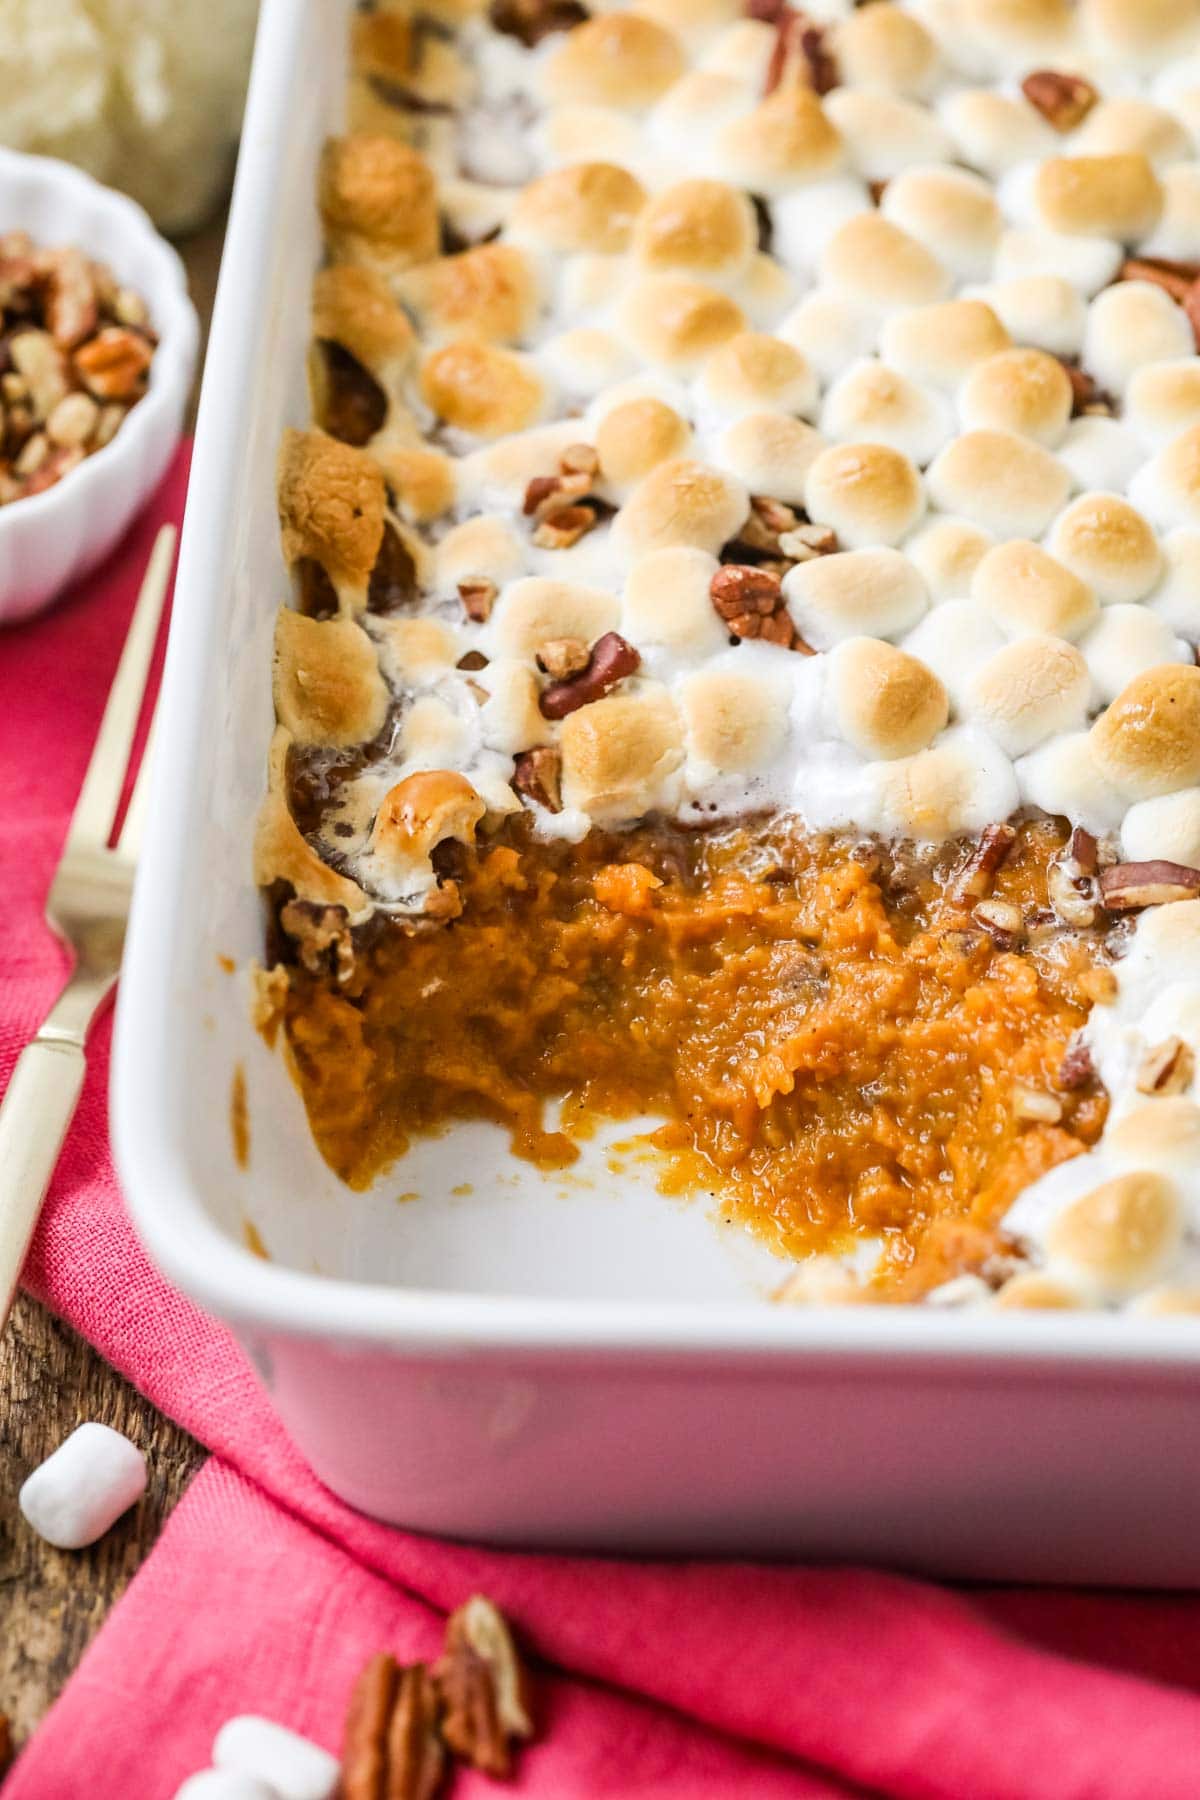 Close-up view of sweet potato casserole in a dish.